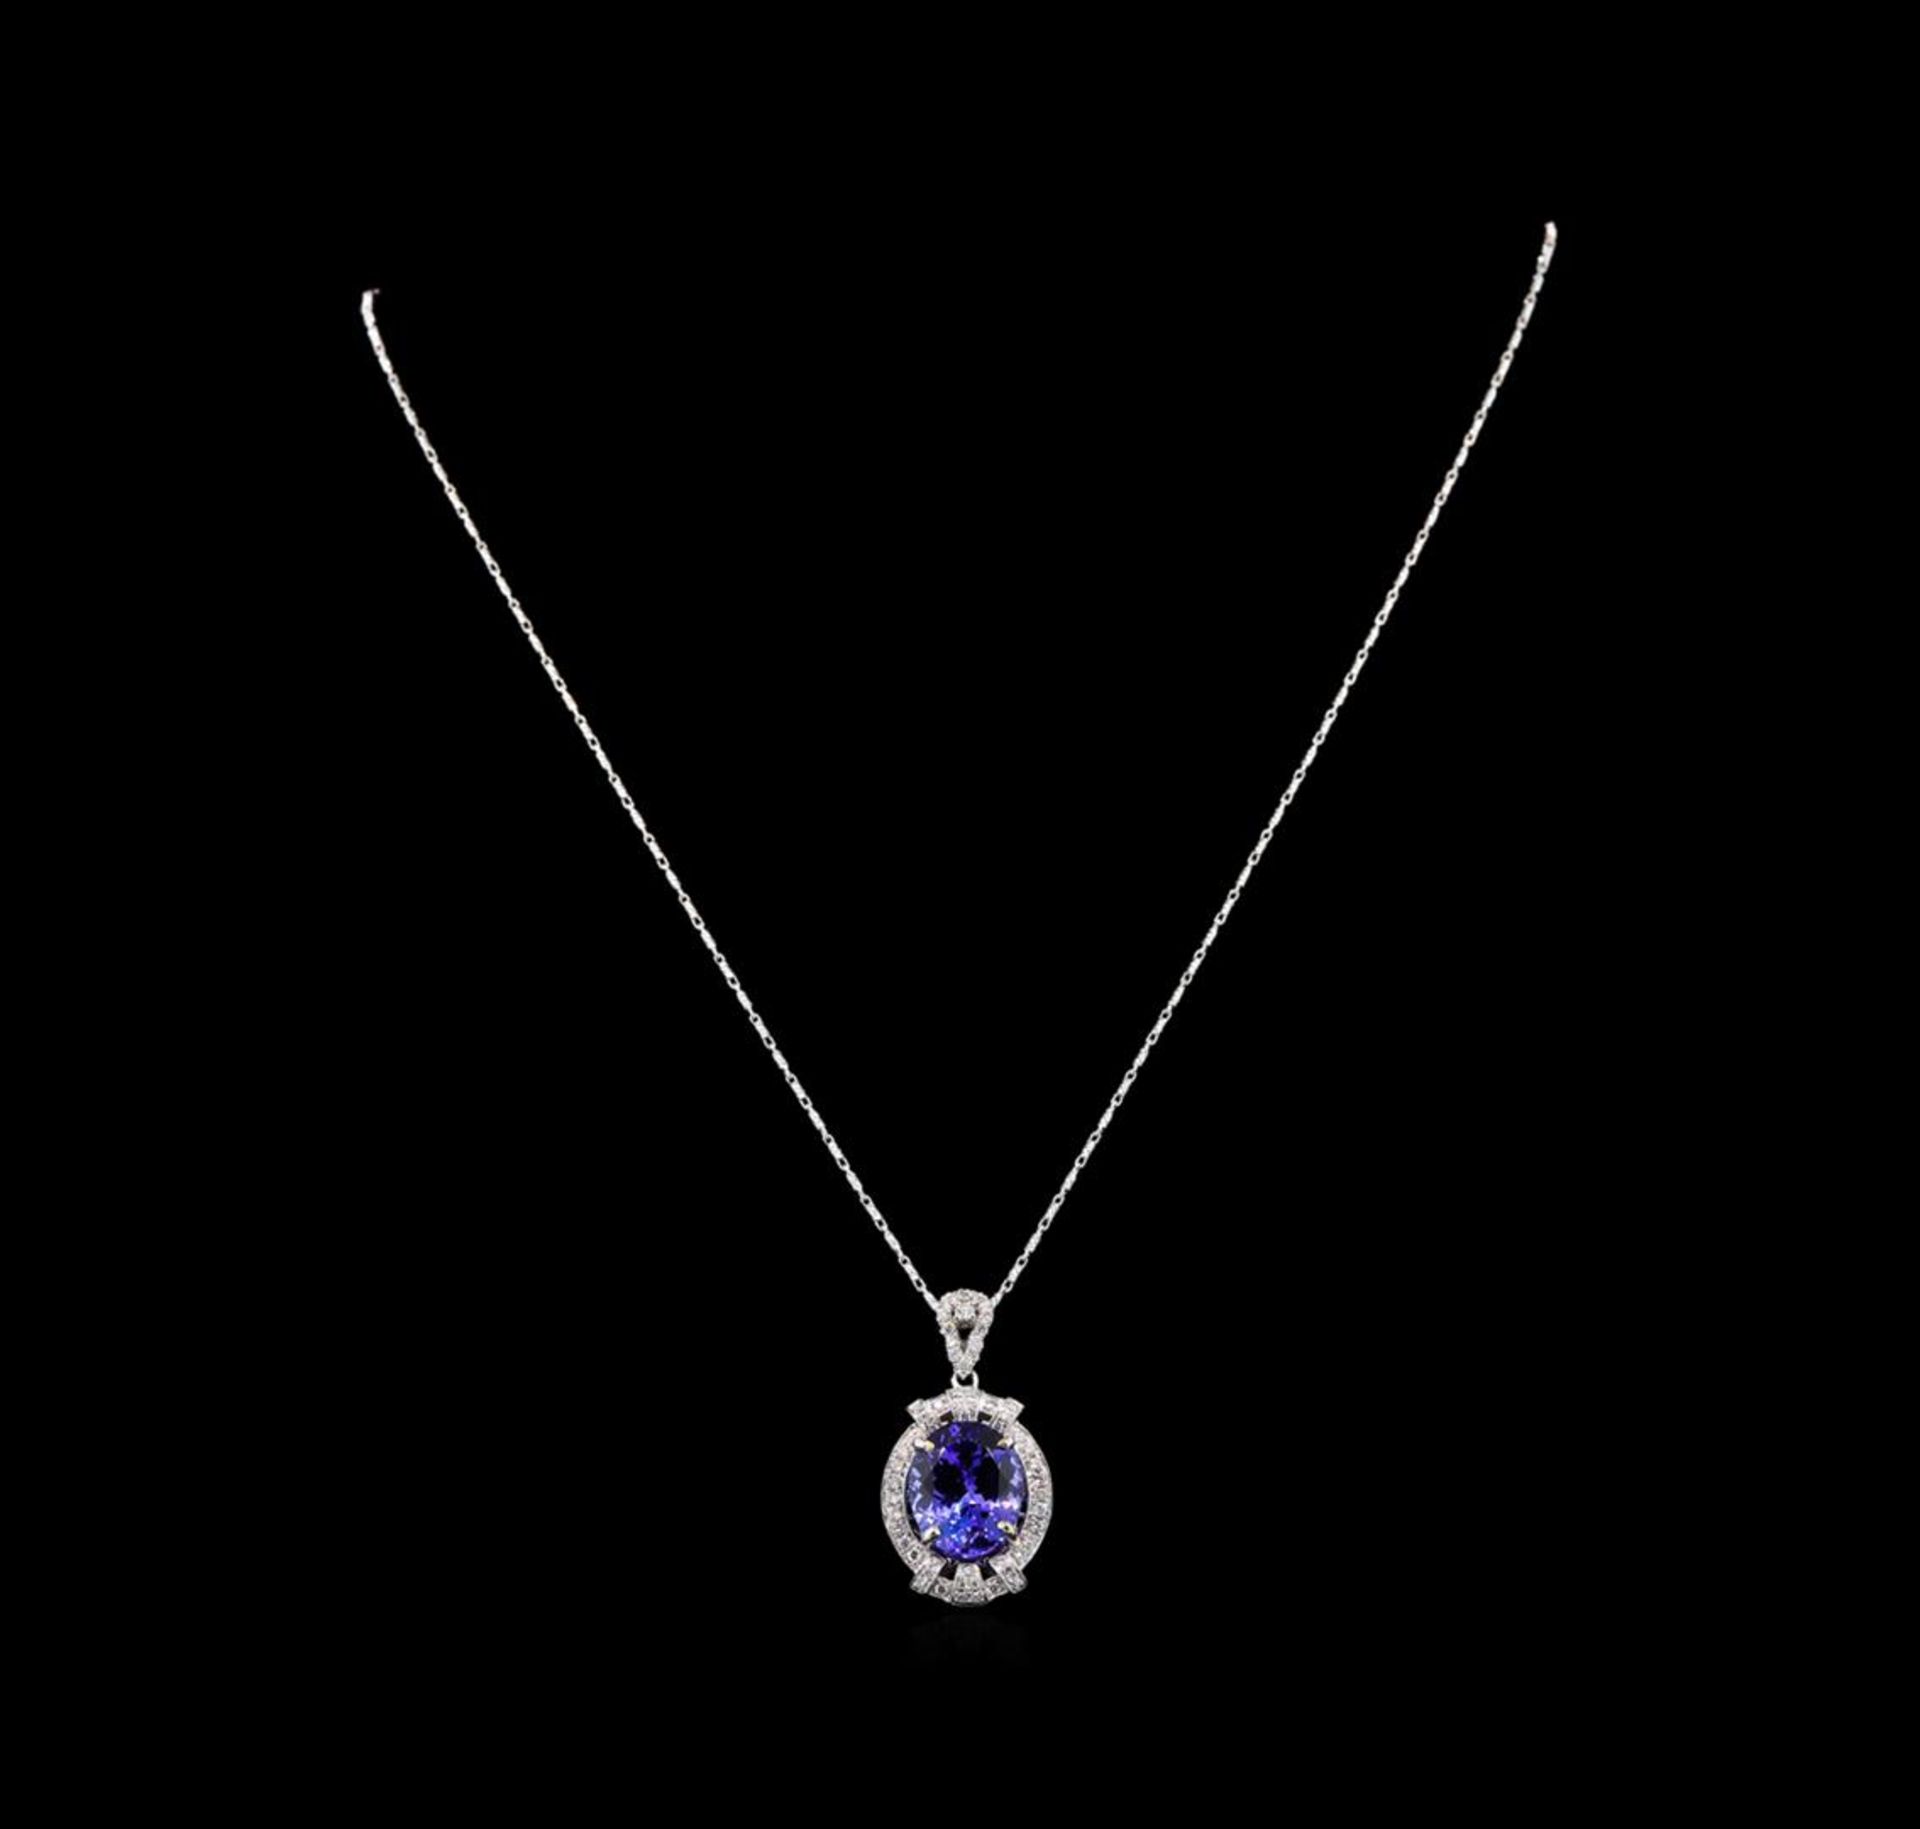 18KT White Gold 6.20 ctw Tanzanite and Diamond Pendant With Chain - Image 4 of 8